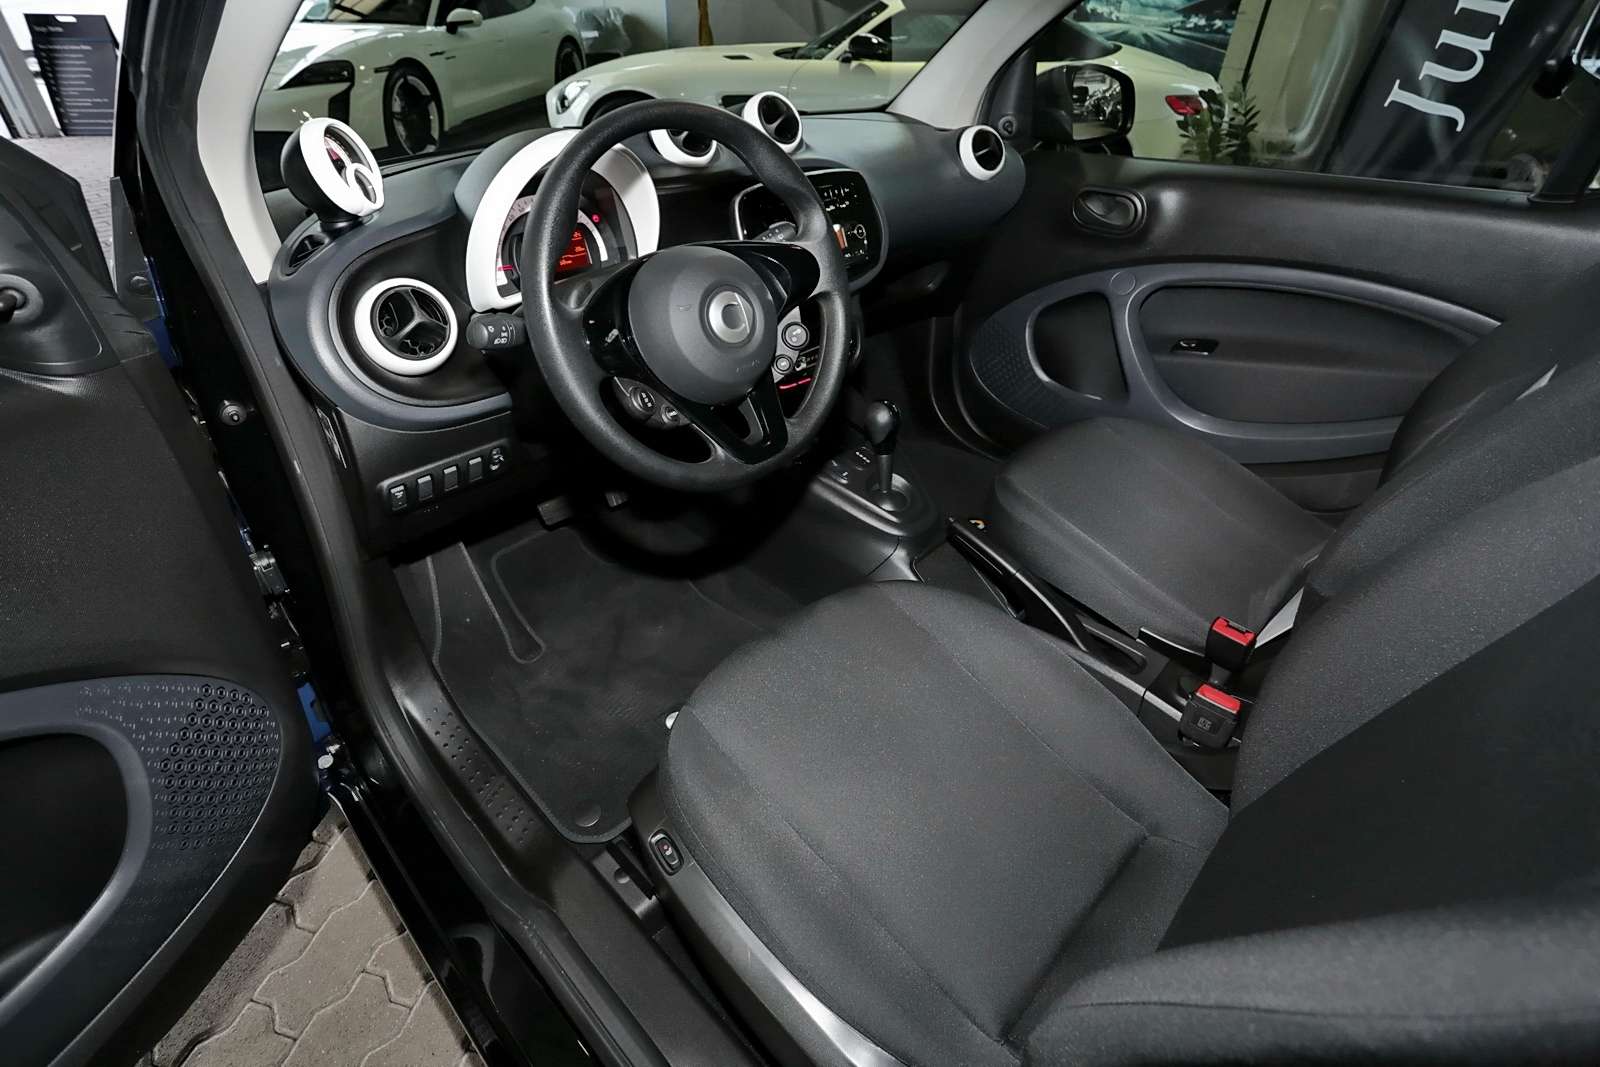 Smart ForTwo EQ Sidebags+Sitzheizung+Tempomat+Cool+ 